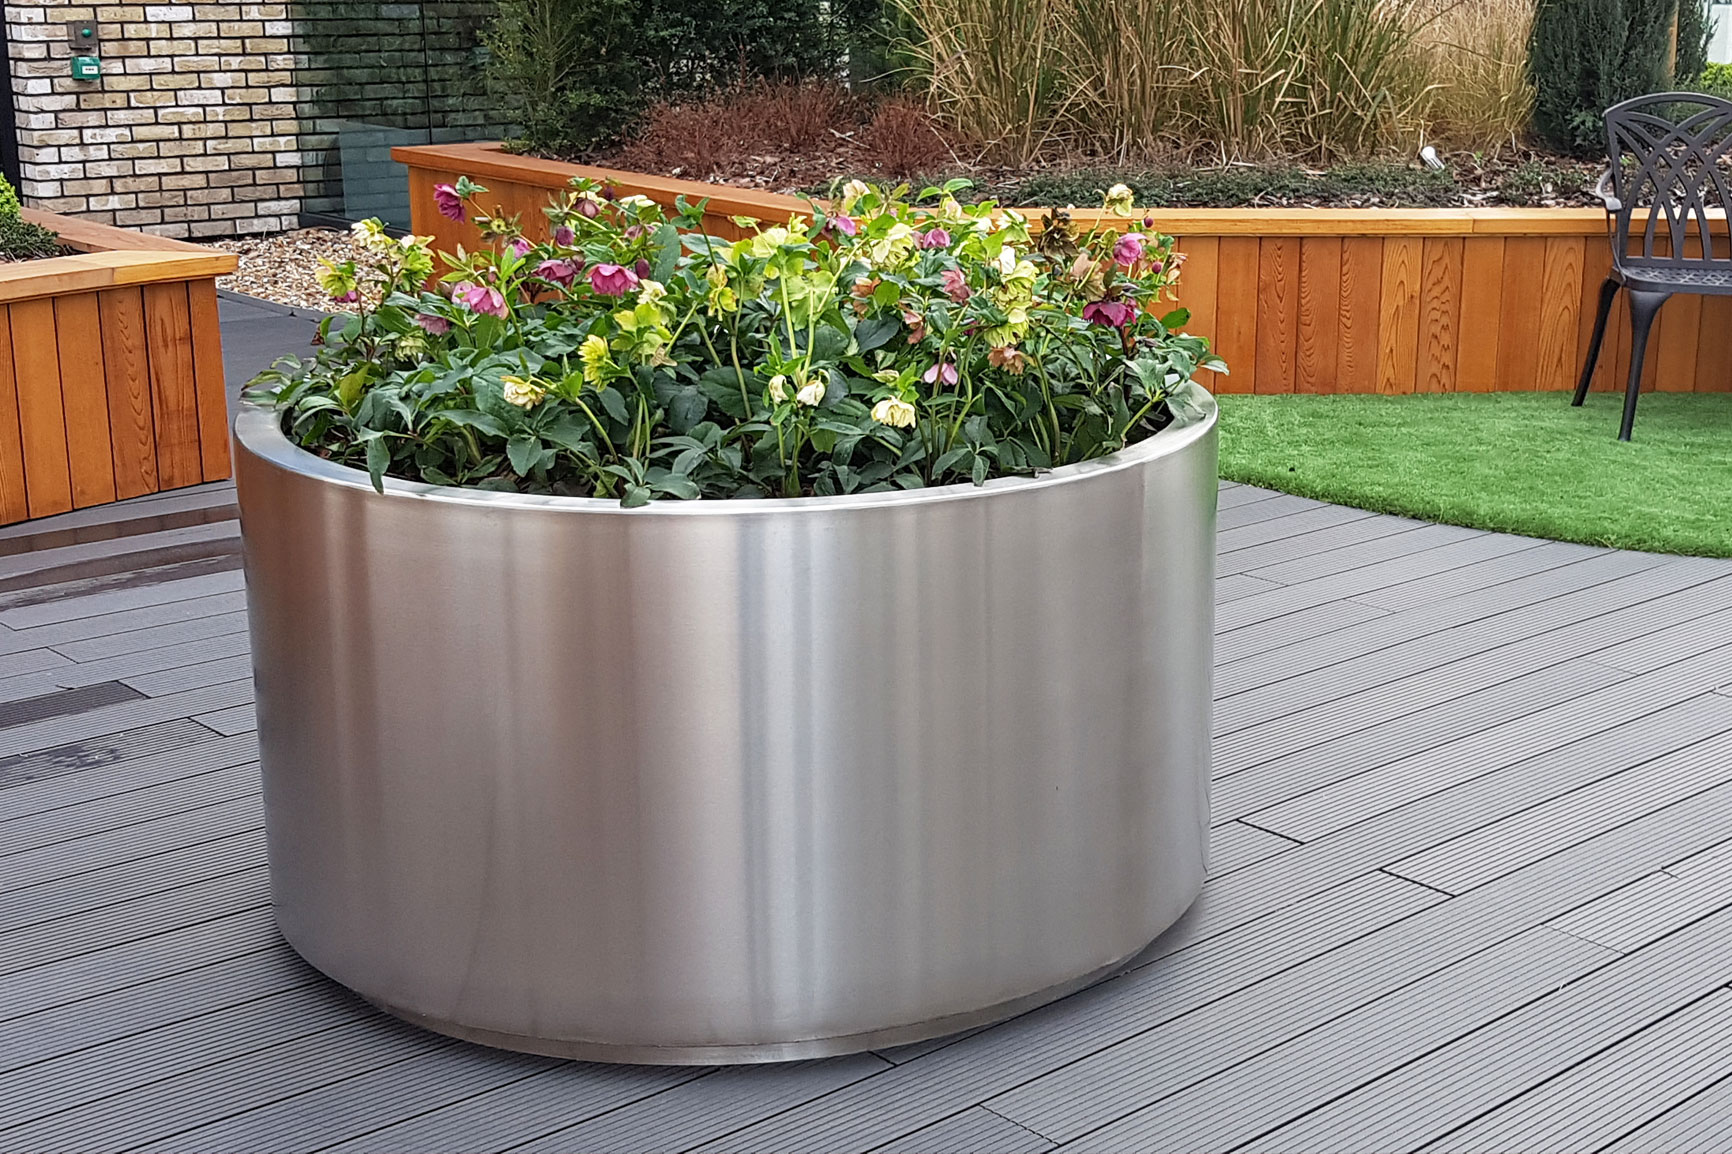 How Sustainable is Stainless Steel Street Furniture?